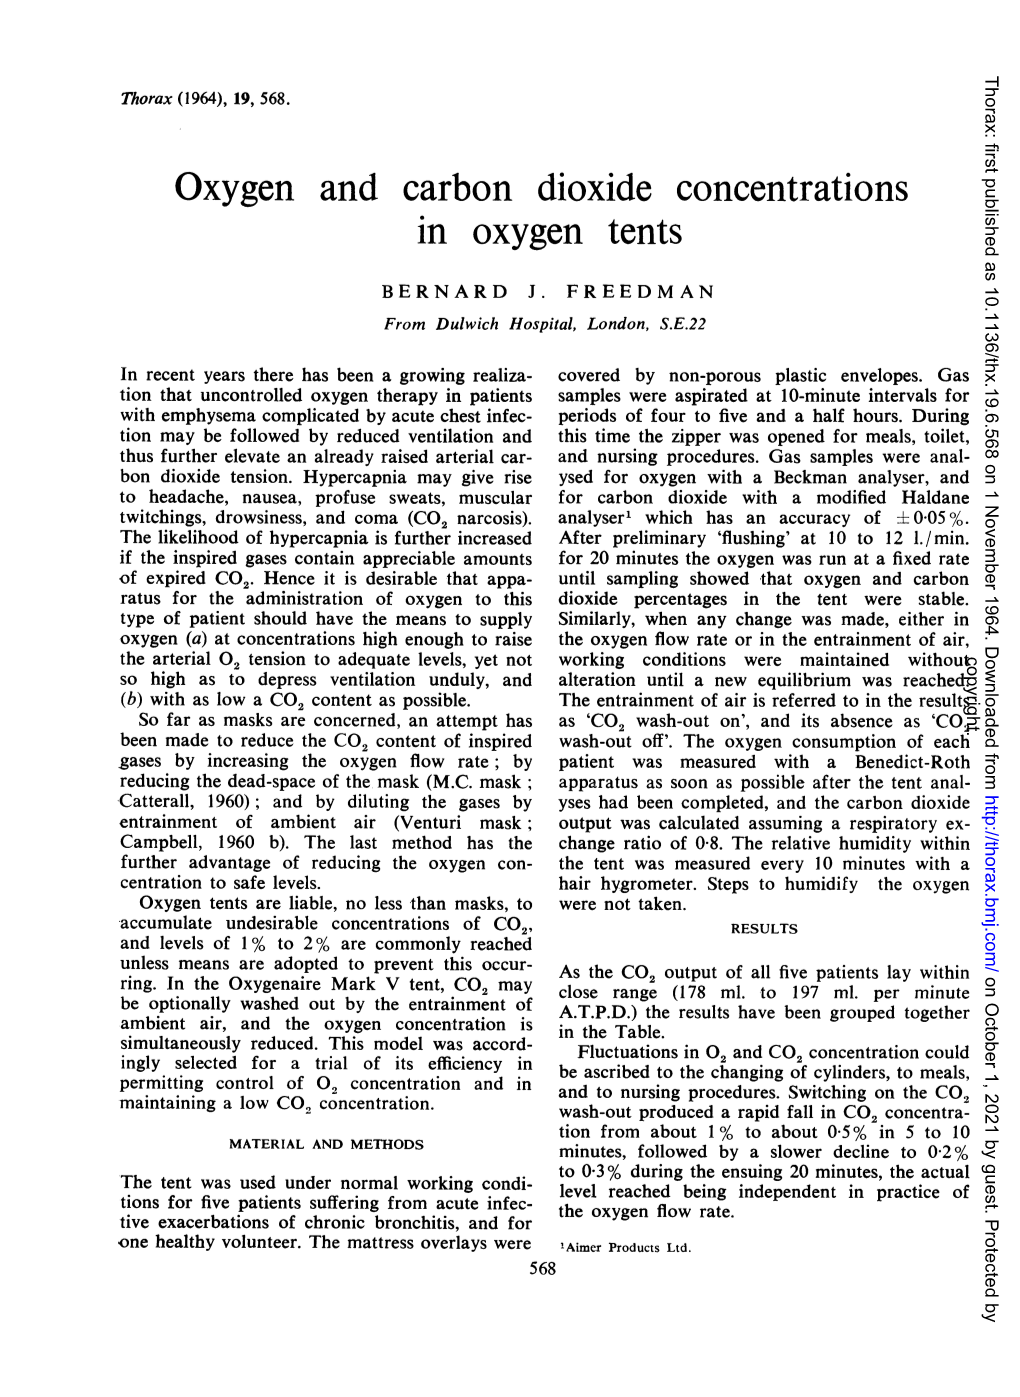 Oxygen and Carbon Dioxide Concentrations in Oxygen Tents